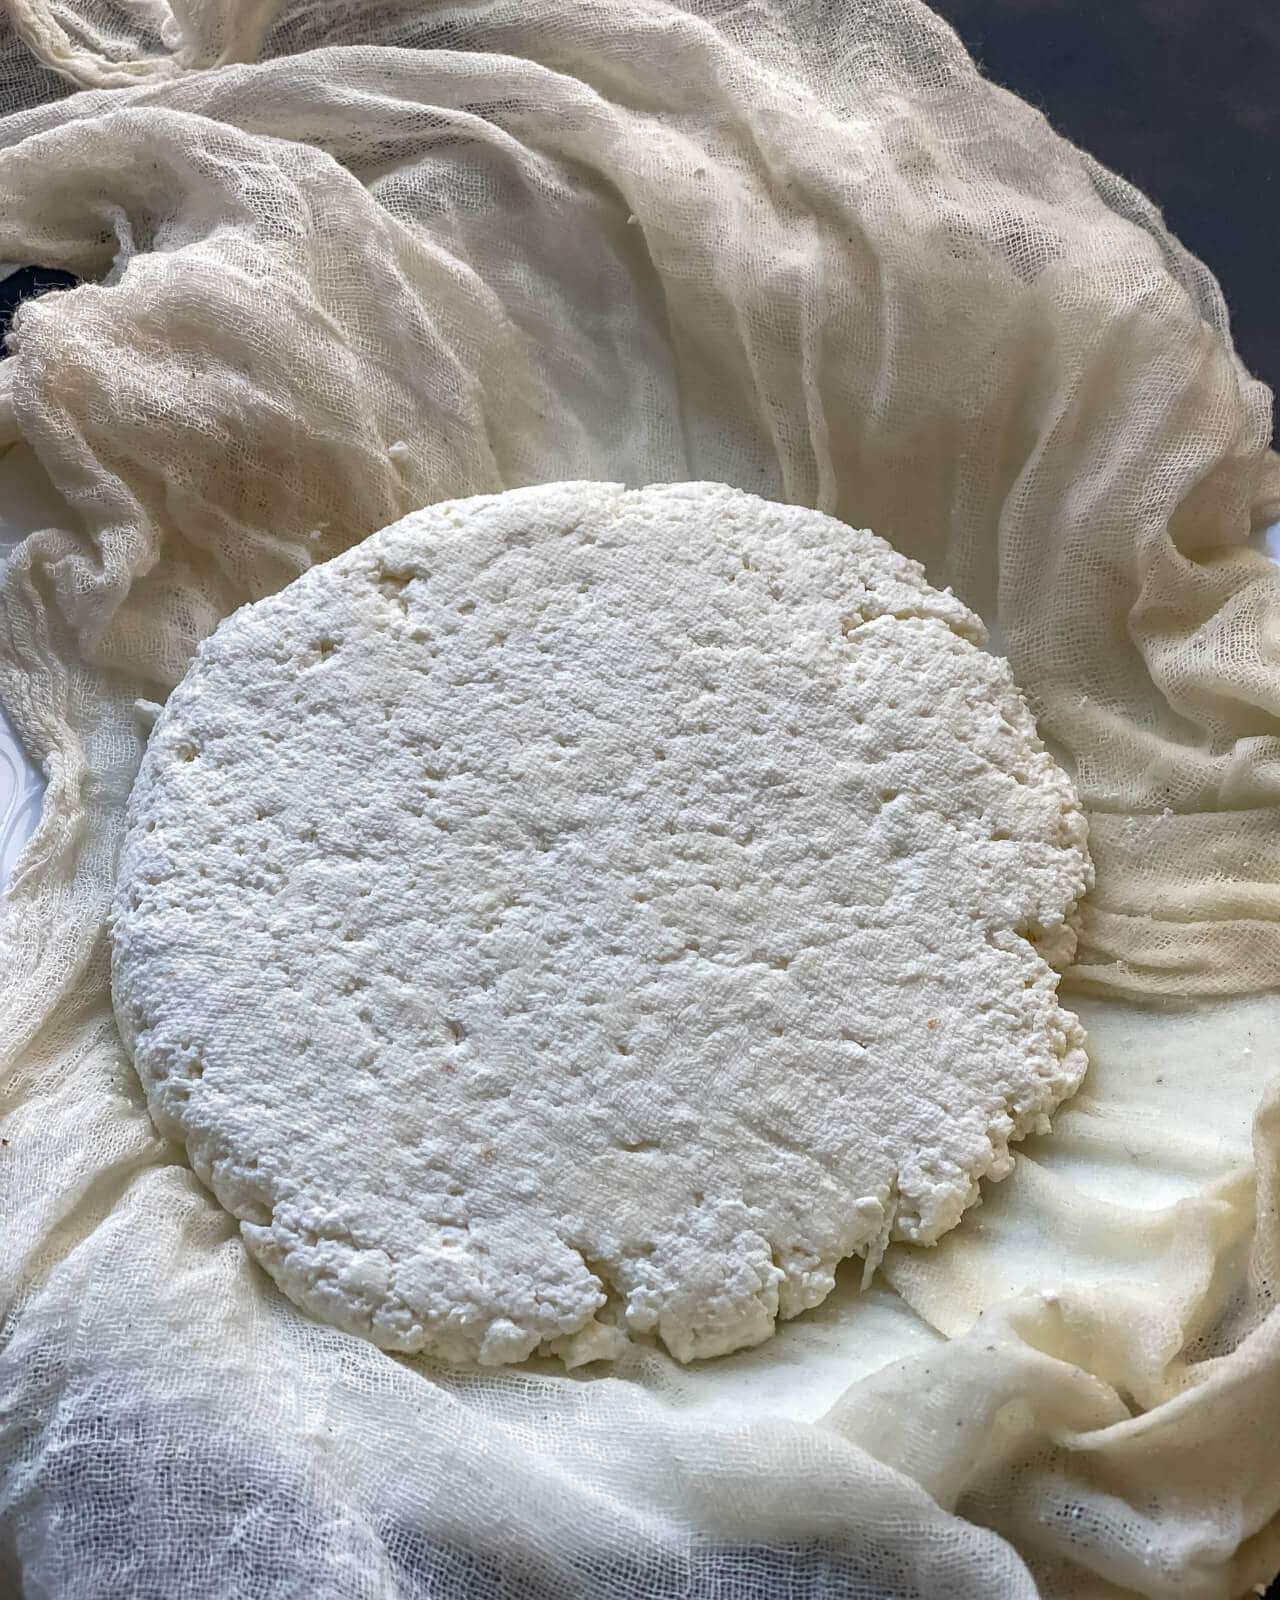 A wheel of paneer unwrapped from the cheese cloth.